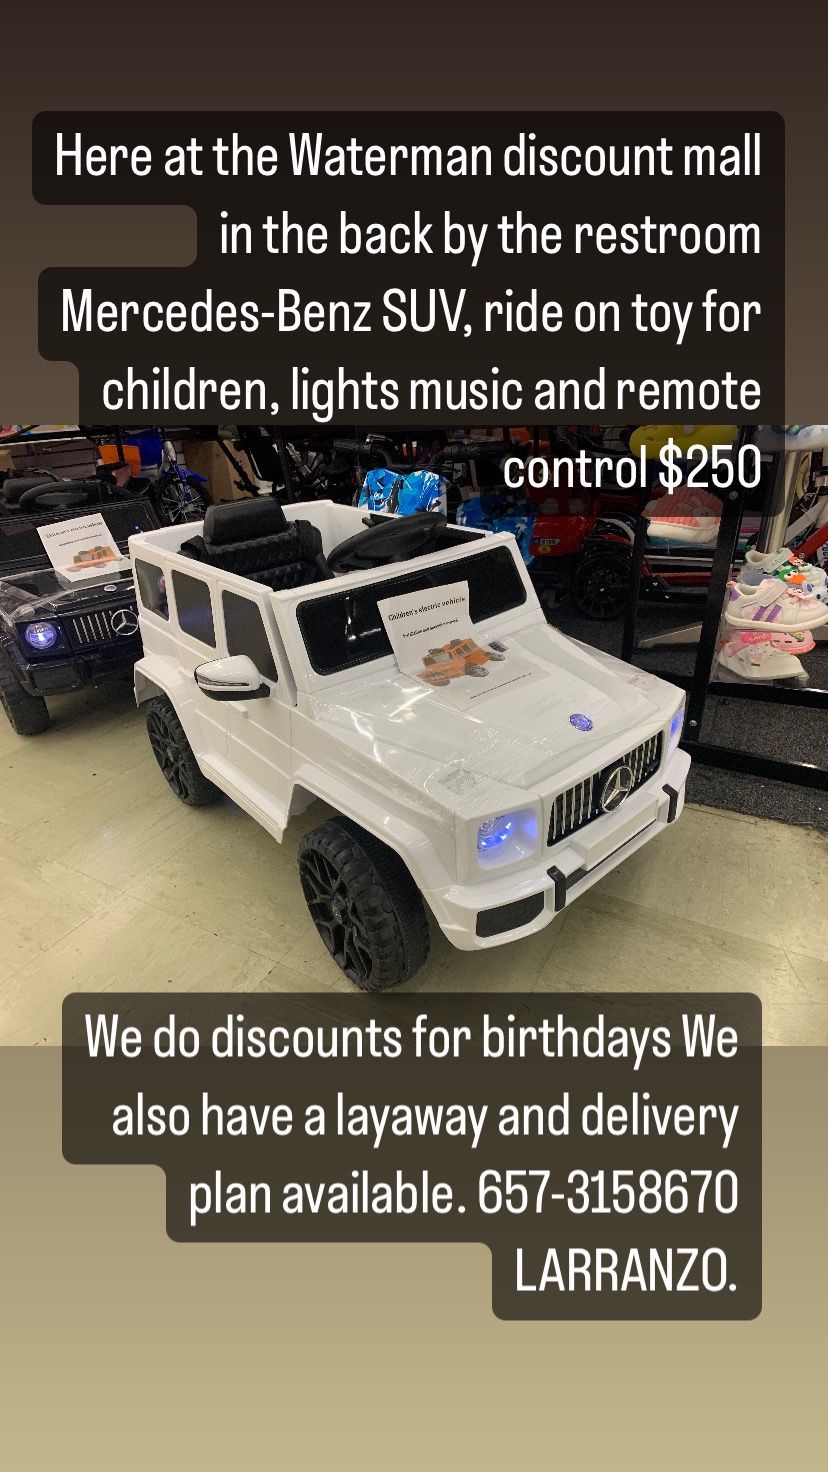 G Wagon Mercedes-Benz Power Wheel Right On Toy For Kids $250 Remote Control